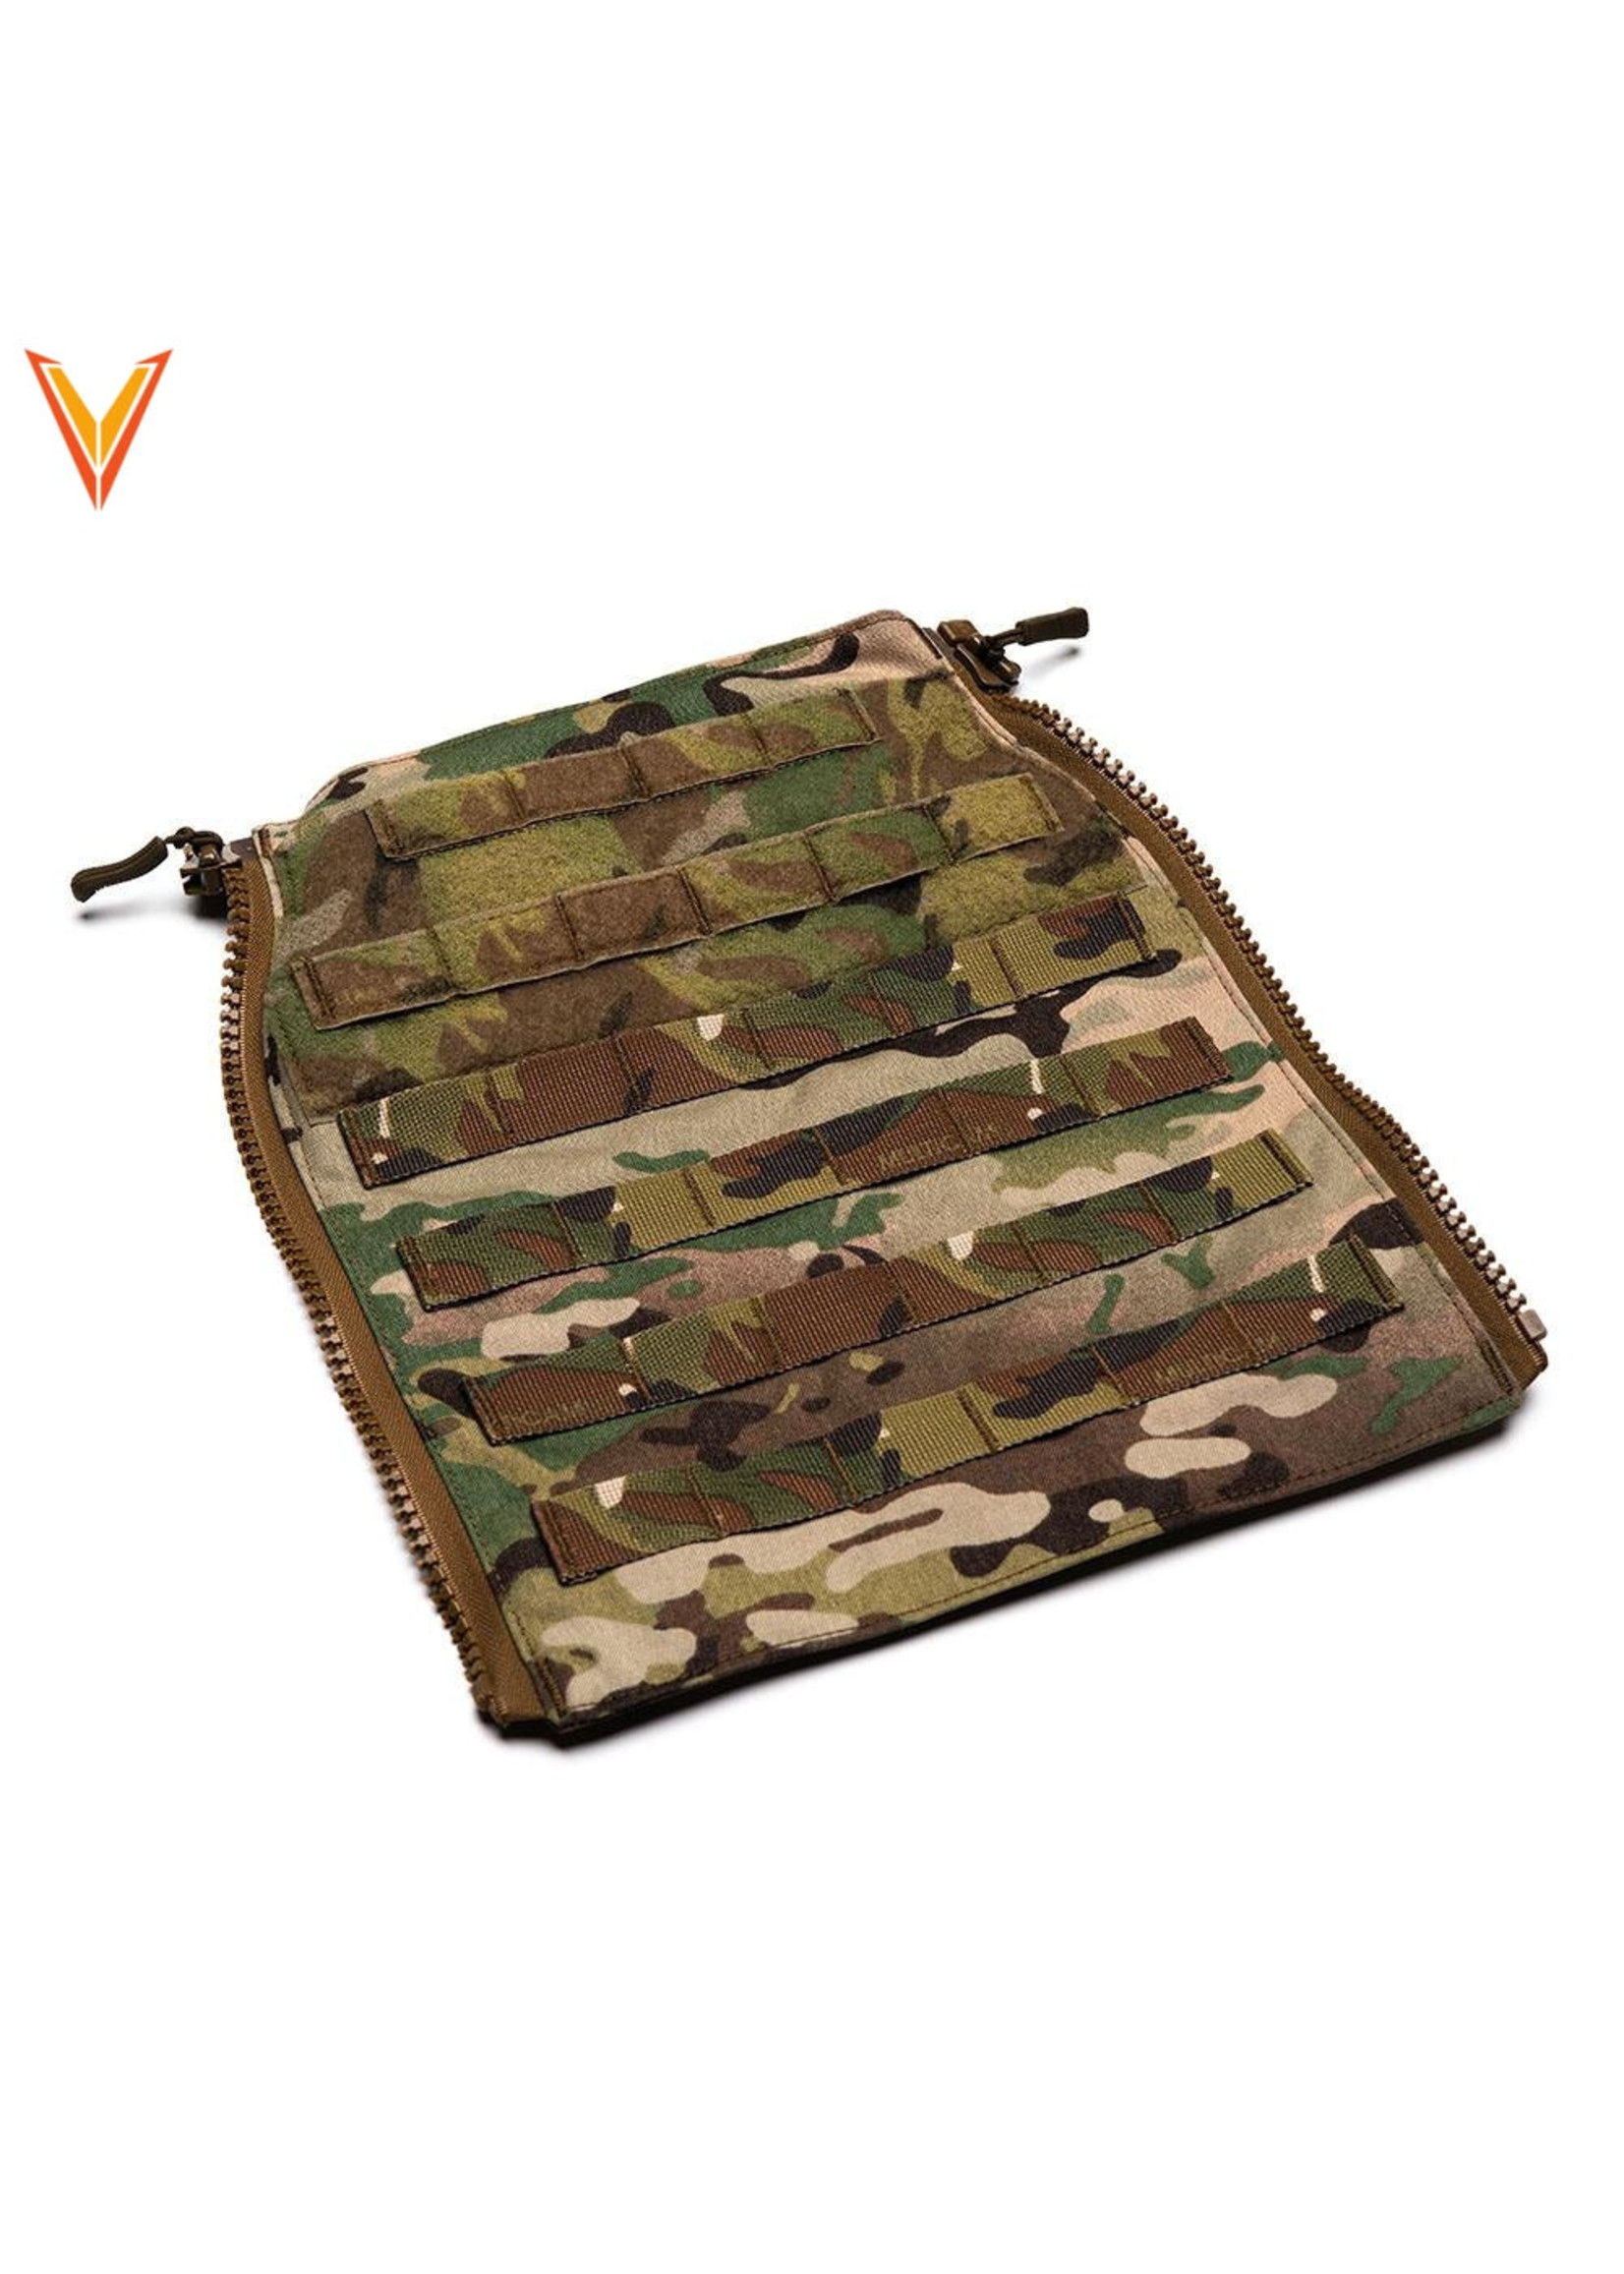 VELOCITY SYSTEMS SCARAB LT MOLLE ZIP-ON BACK PANEL